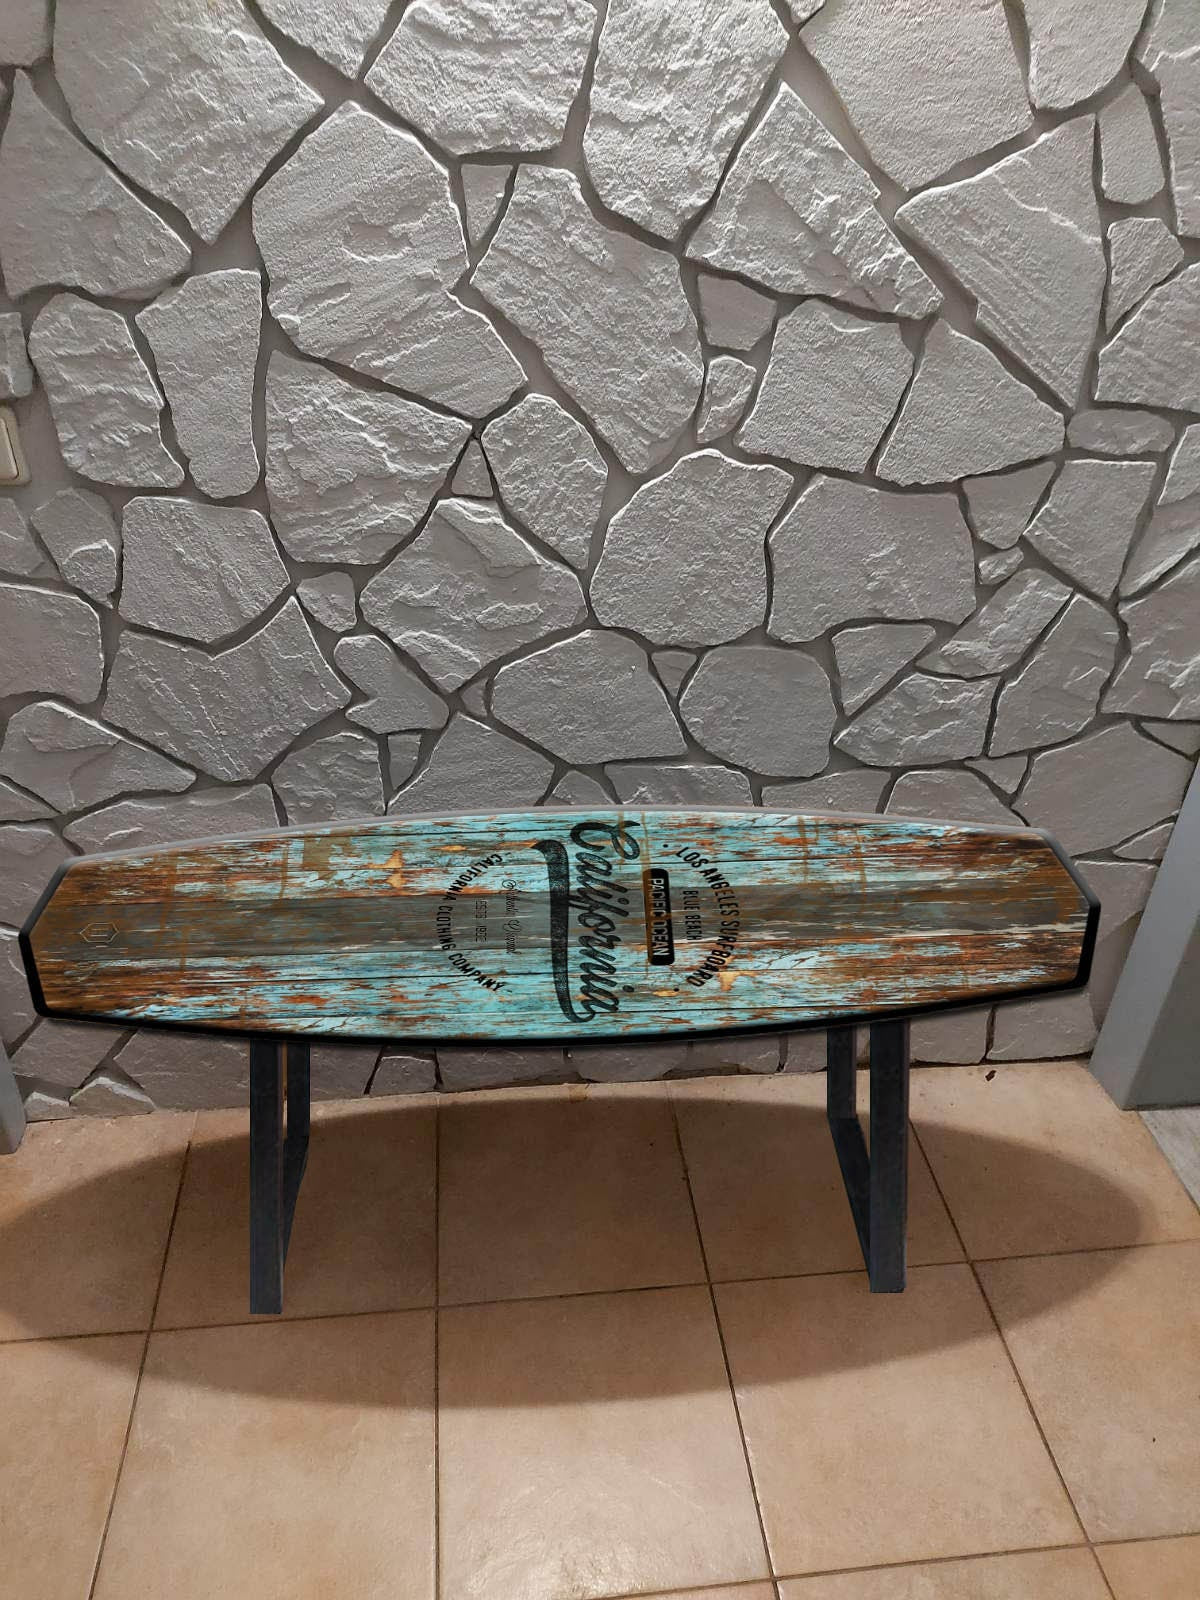 Wooden Antique Table: Coffee Table in Shape of a Surfboard for the Coastal House Decor